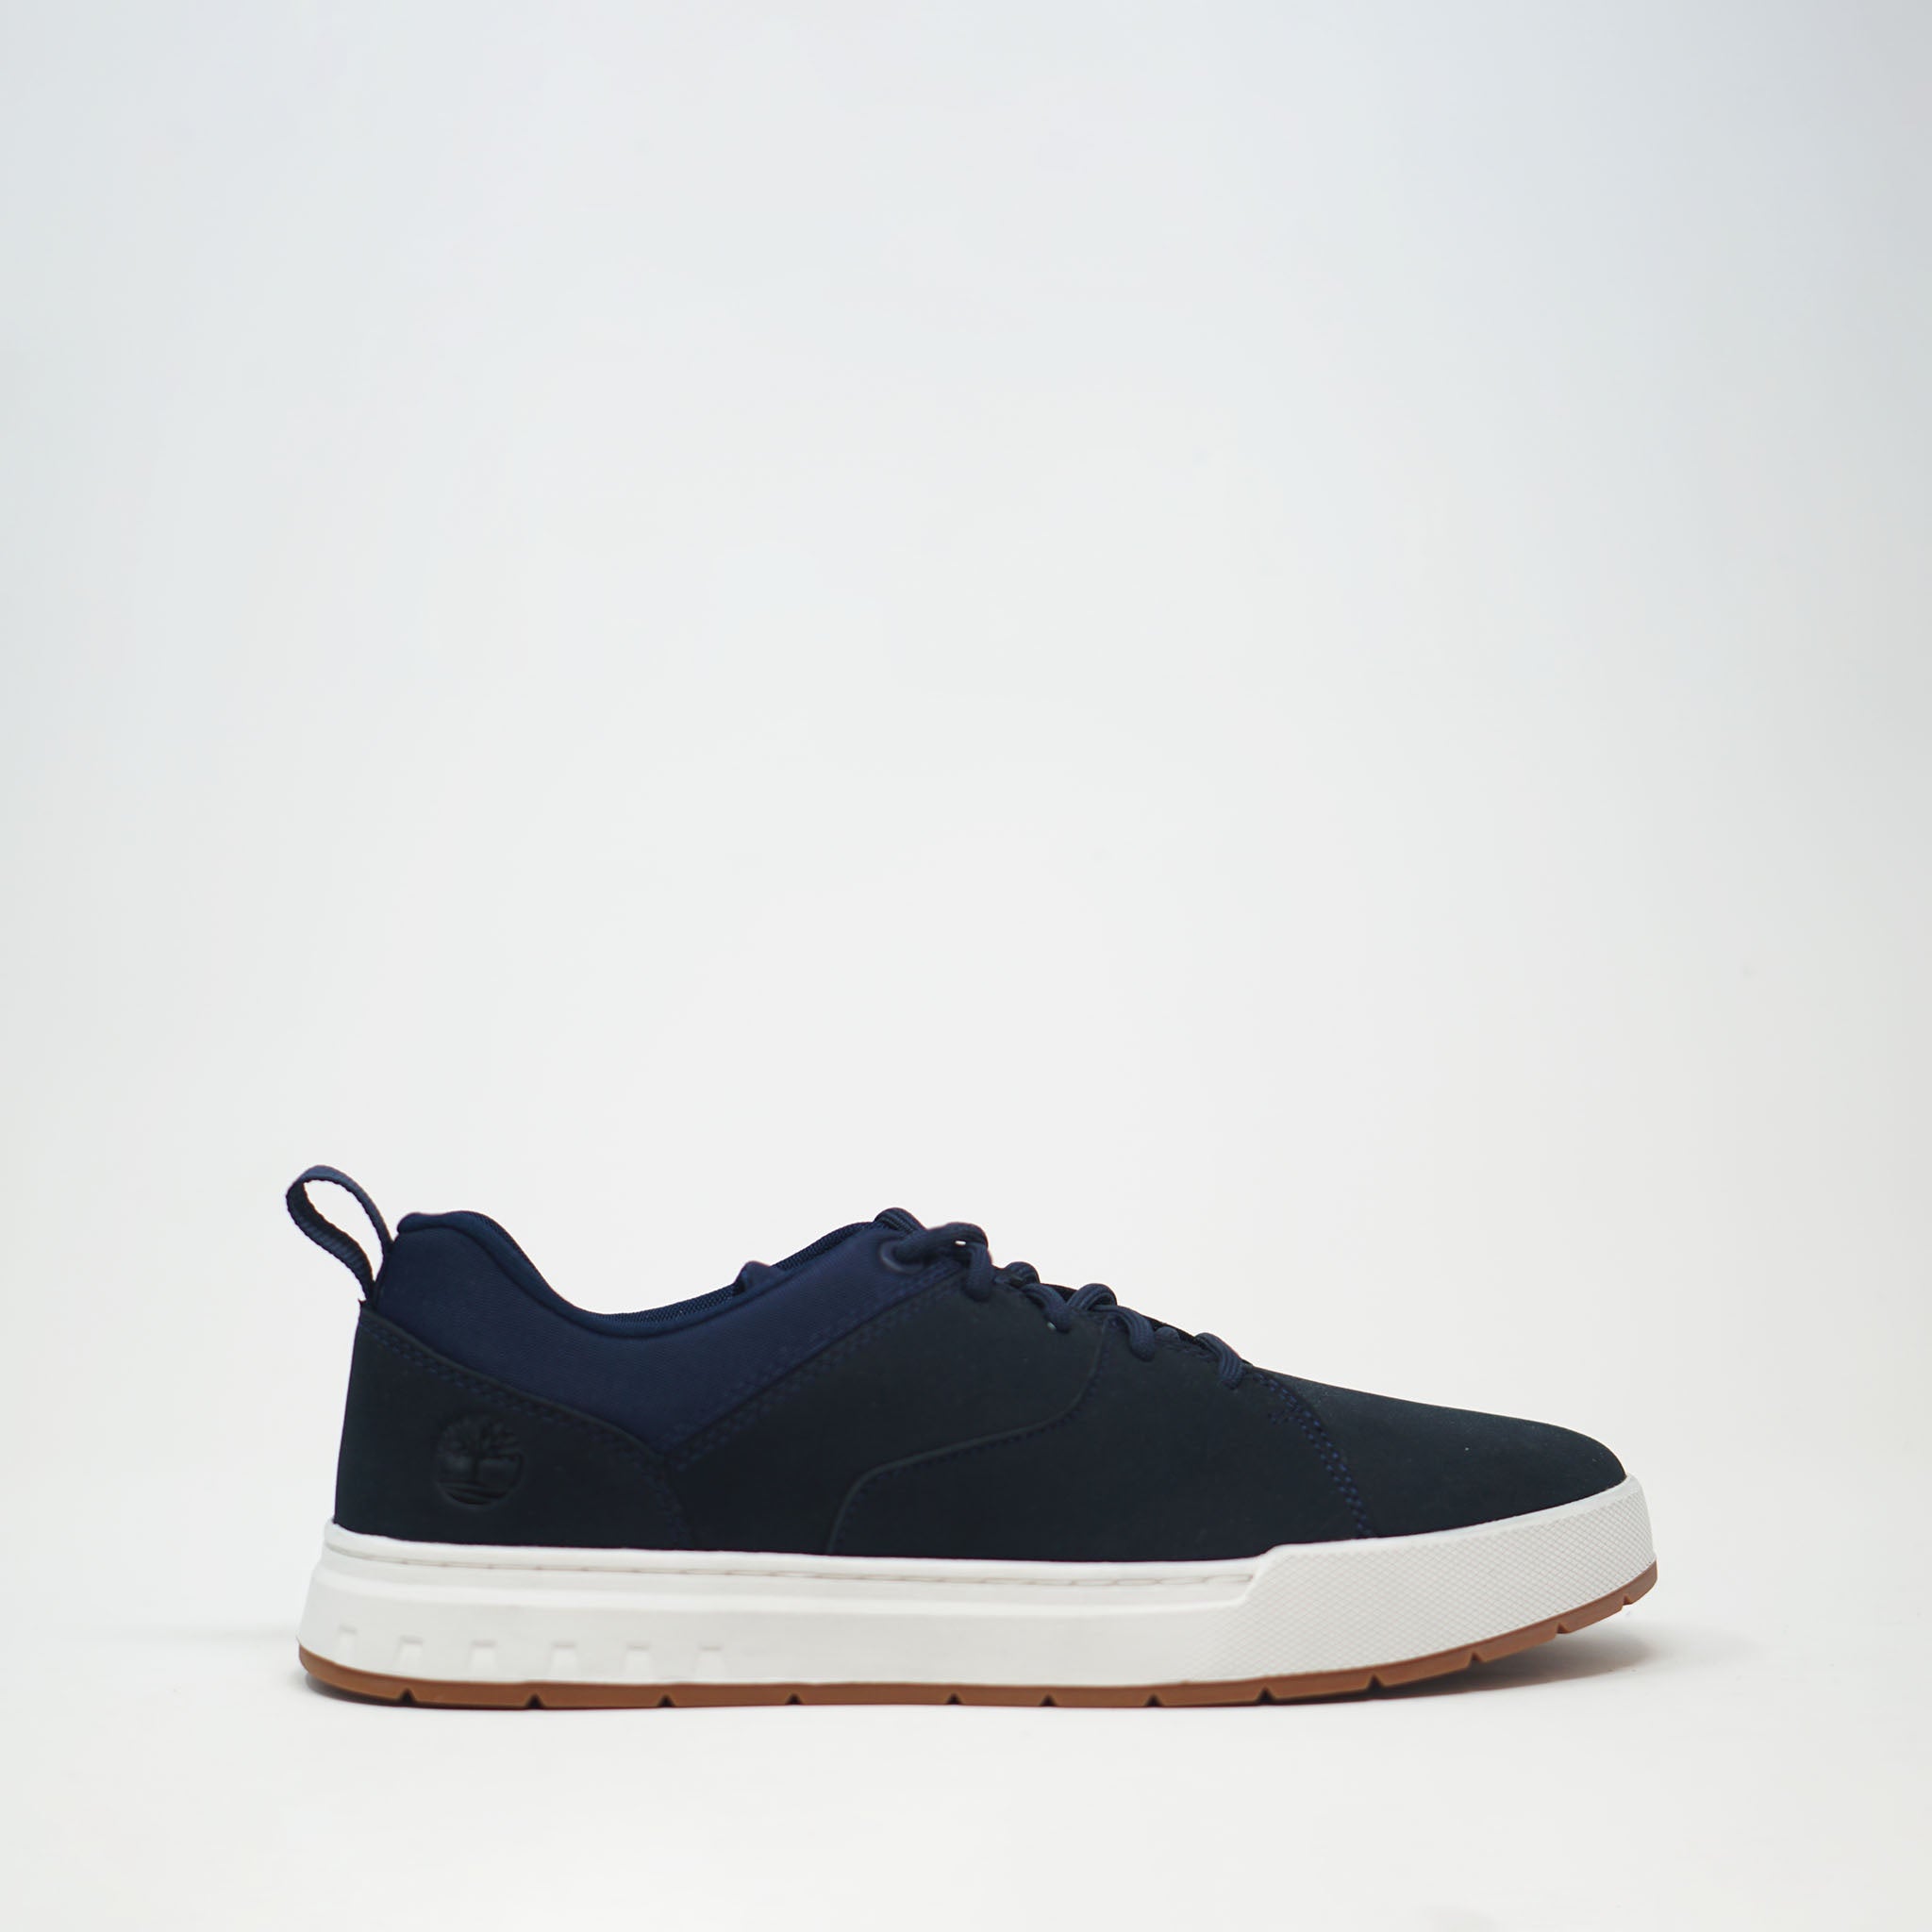 Timberland Maple Grove Leather Oxford Navy